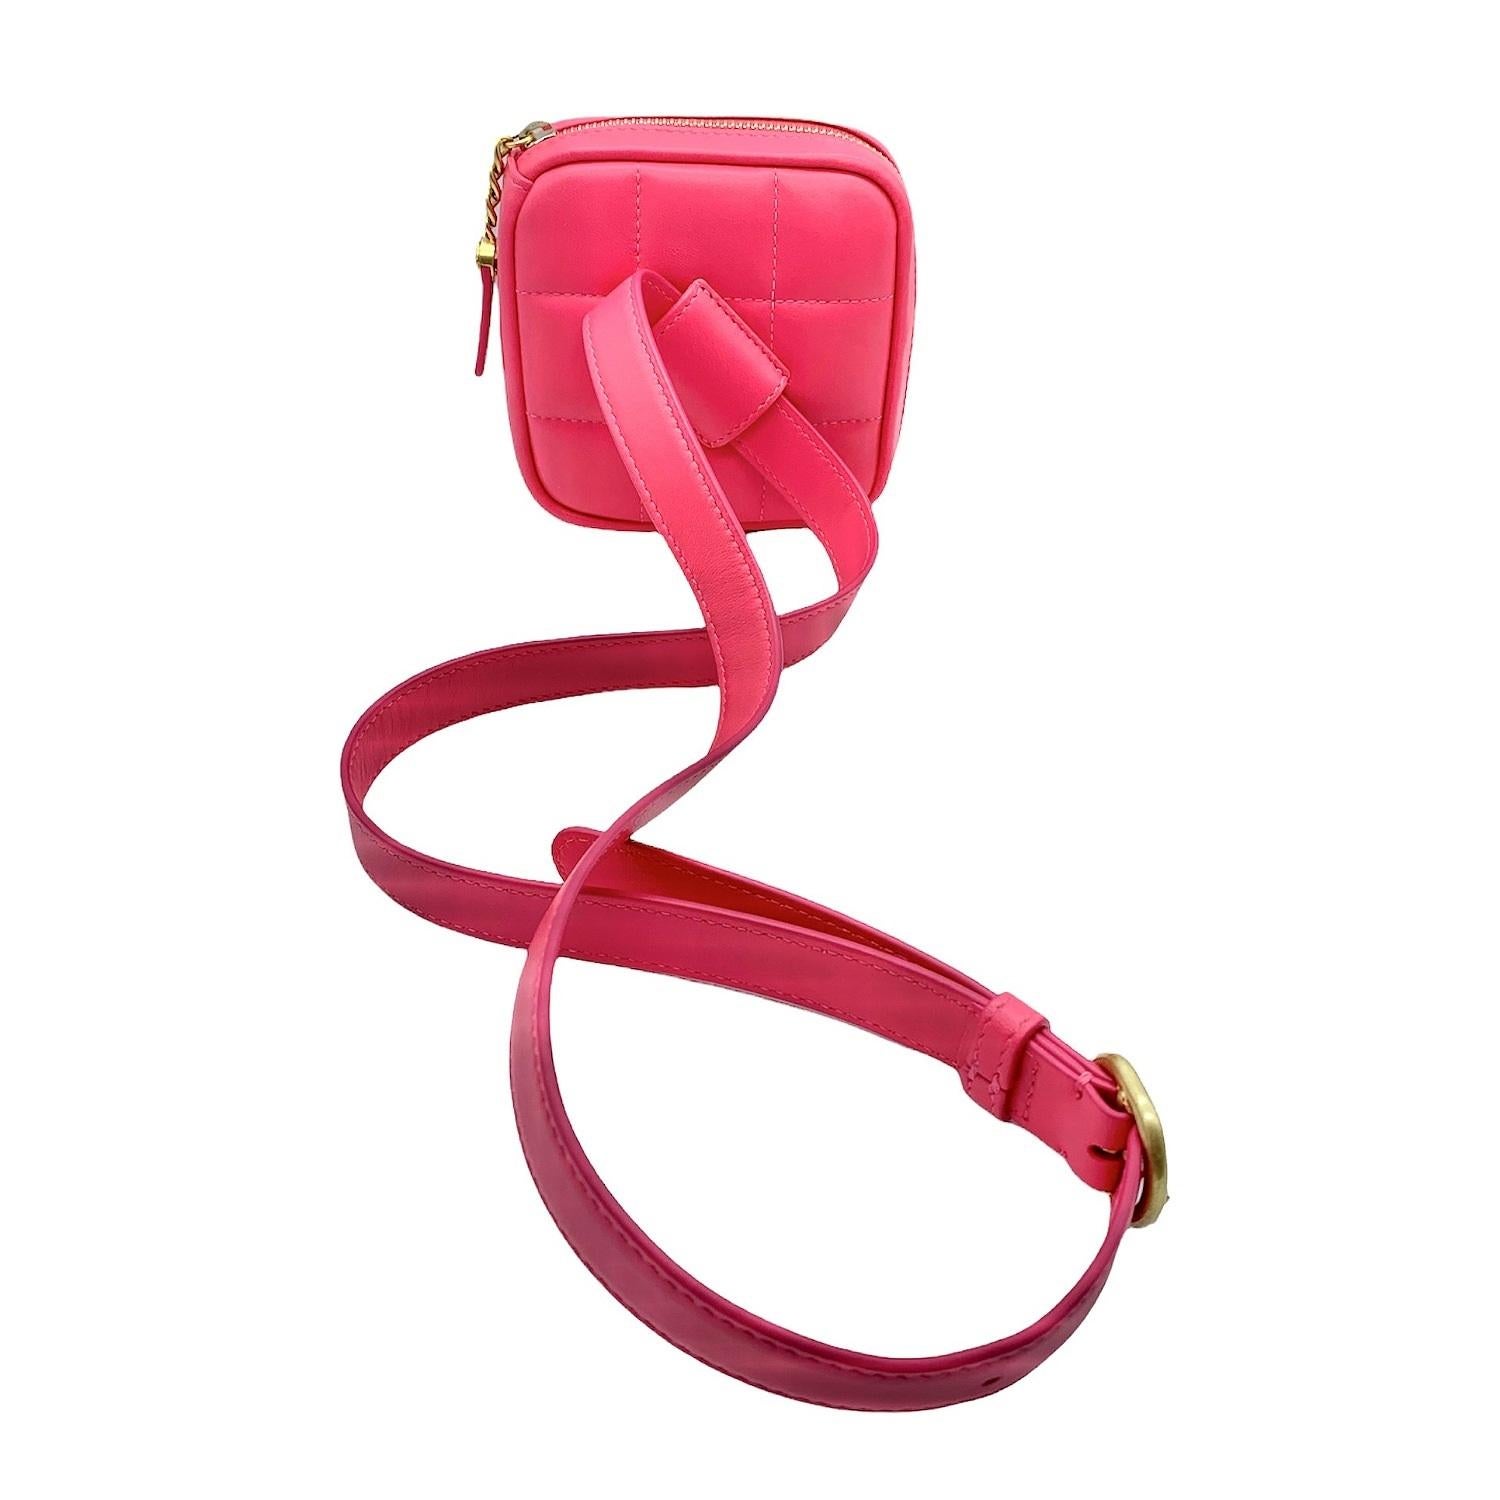 This stylish diamond belt coin purse is finely crafted of smooth Calfskin leather. The bag features a pink belt and gold hardware including a zipper that opens to a fine textile interior.

Designer: Chanel
Material: Calfskin leather
Origin: